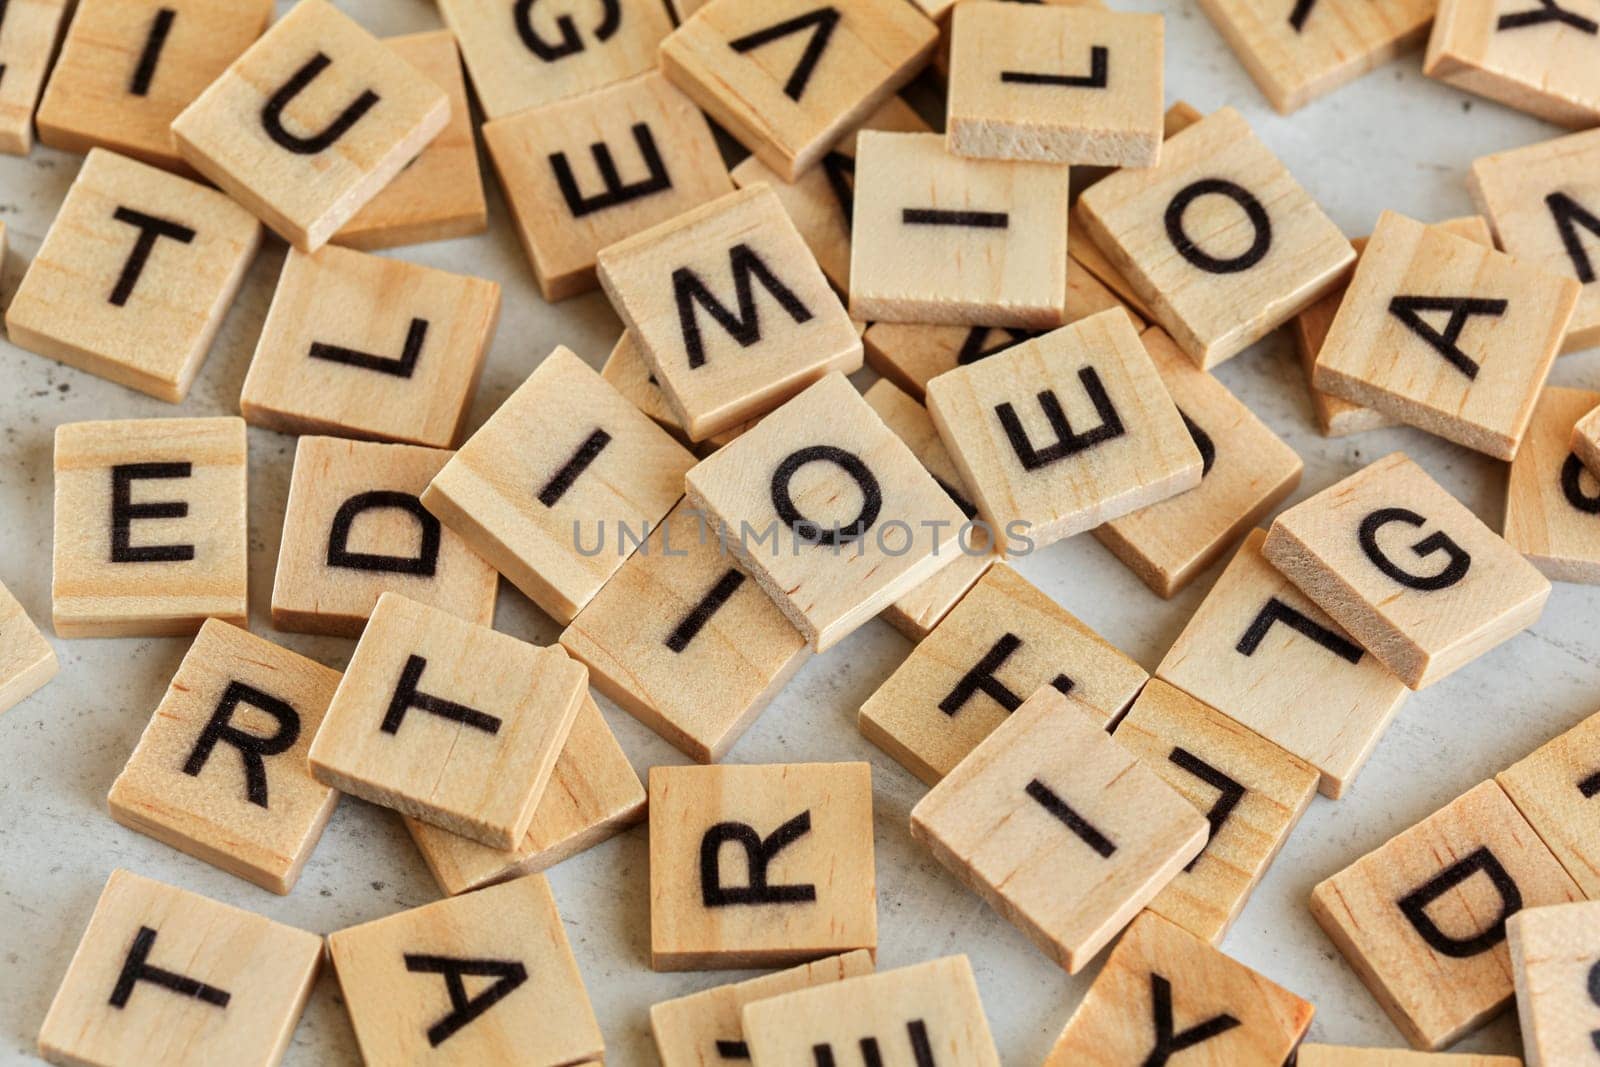 Pile of wooden tiles with various letters scattered on white stone like board, closeup view from above by Ivanko